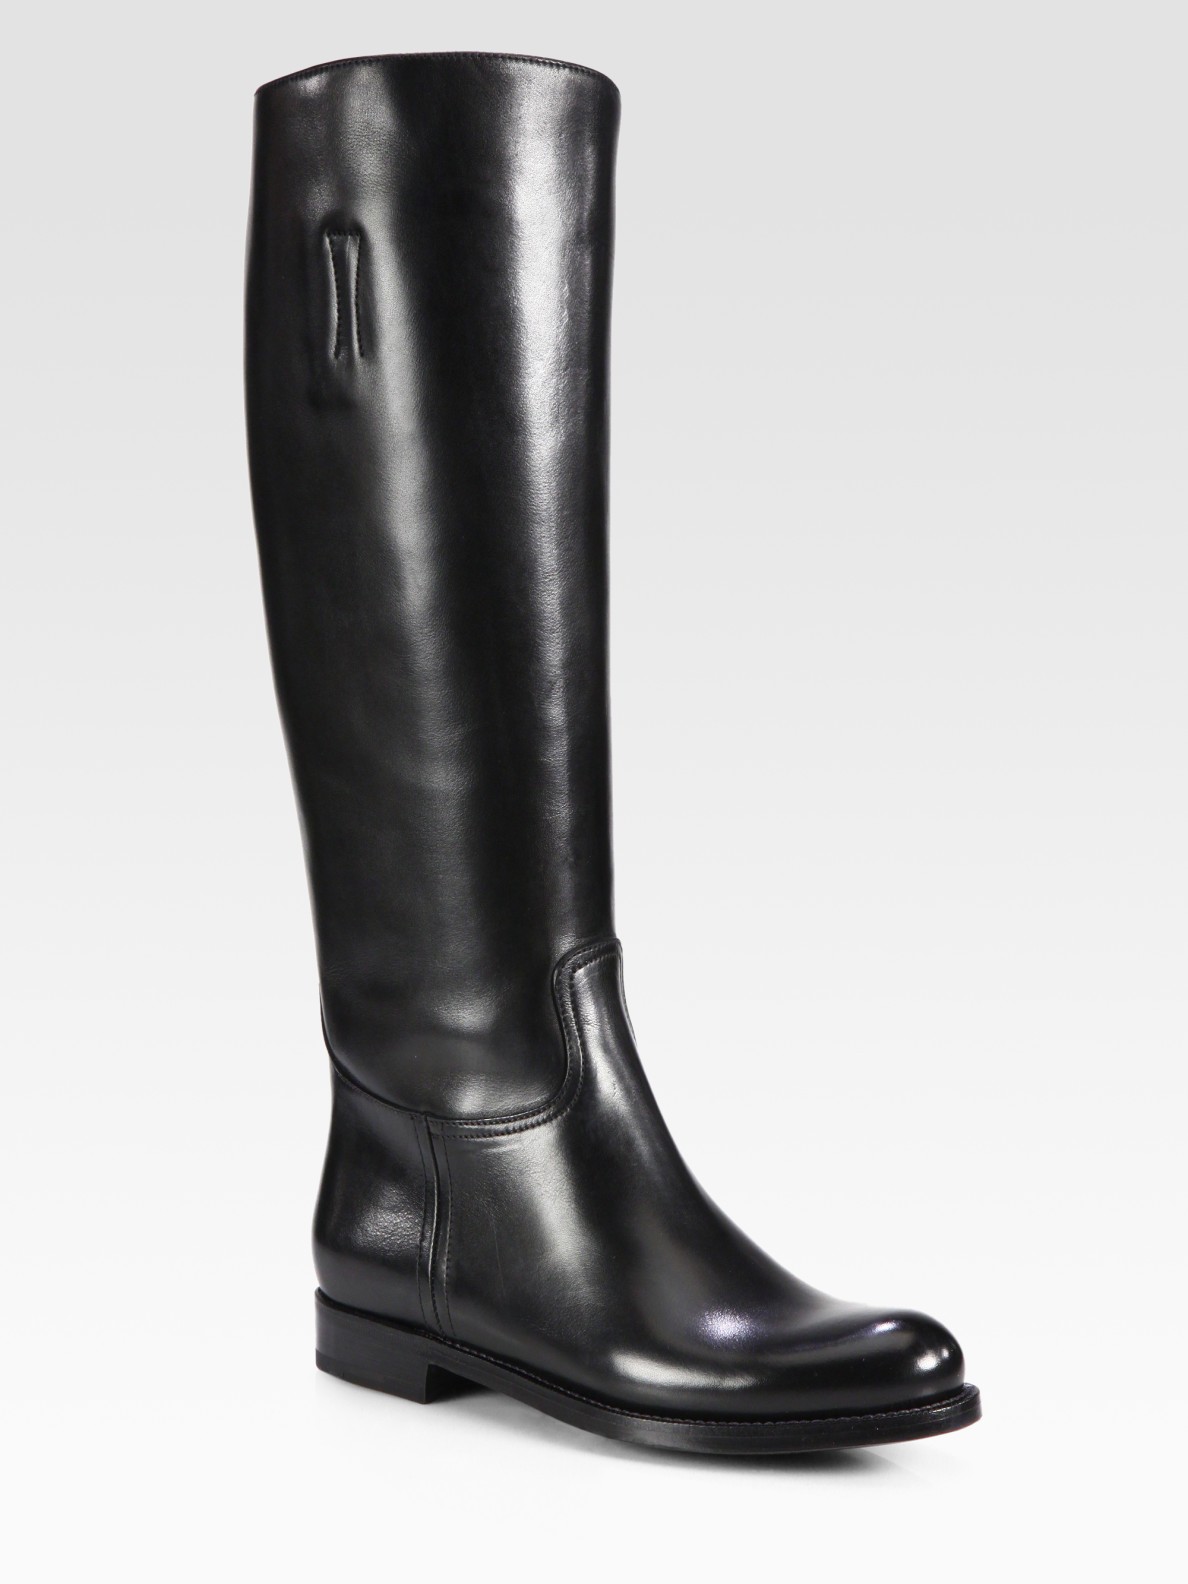 Prada Leather Riding Boots in Black - Lyst